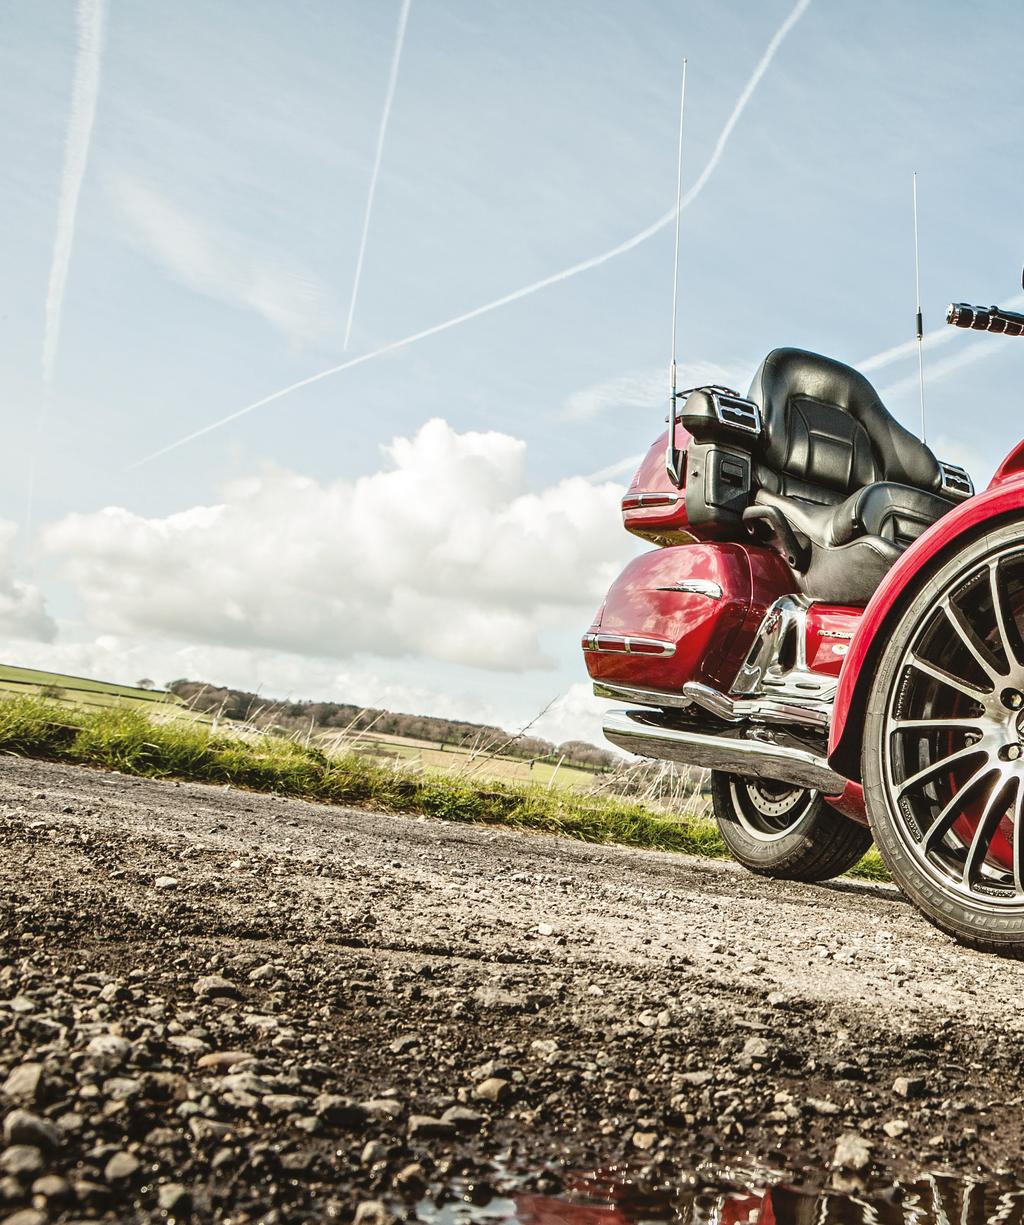 TRIKE MAIN FEATURE WORDS: CHRIS REES IMAGES: VAIDAS GERIKAS GOLD SPICE WE GET BEHIND THE TWIN FRONT WHEELS OF THE ALL-NEW STURGIS R18 REVERSE TRIKE BASED ON THE HONDA GOLD WING GL1800 AND TO SAY WE